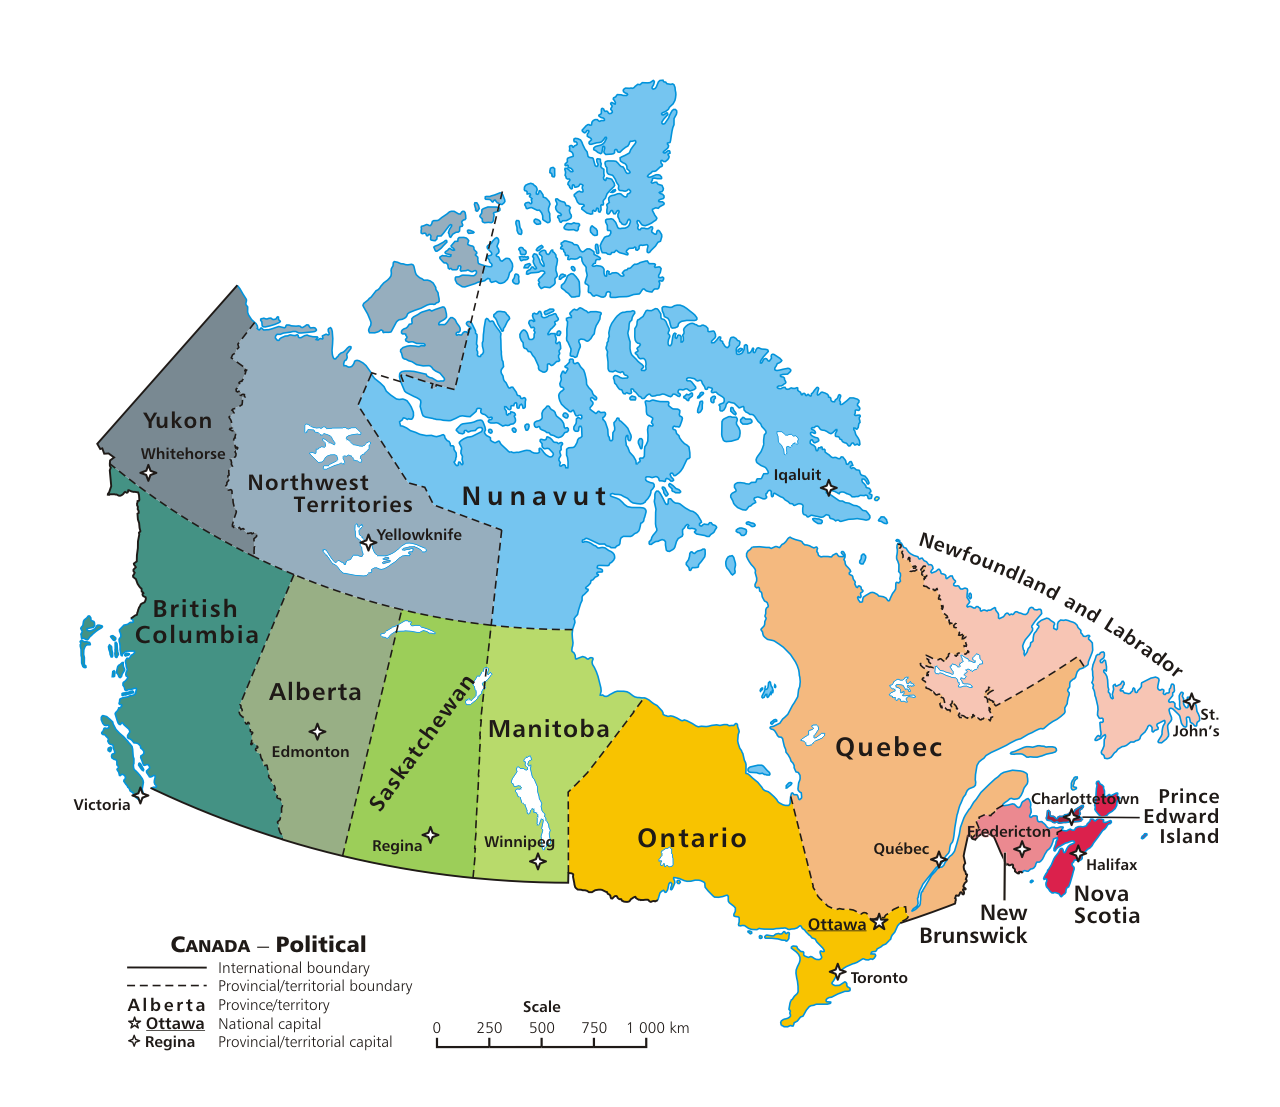 File:Political map of Canada.png.